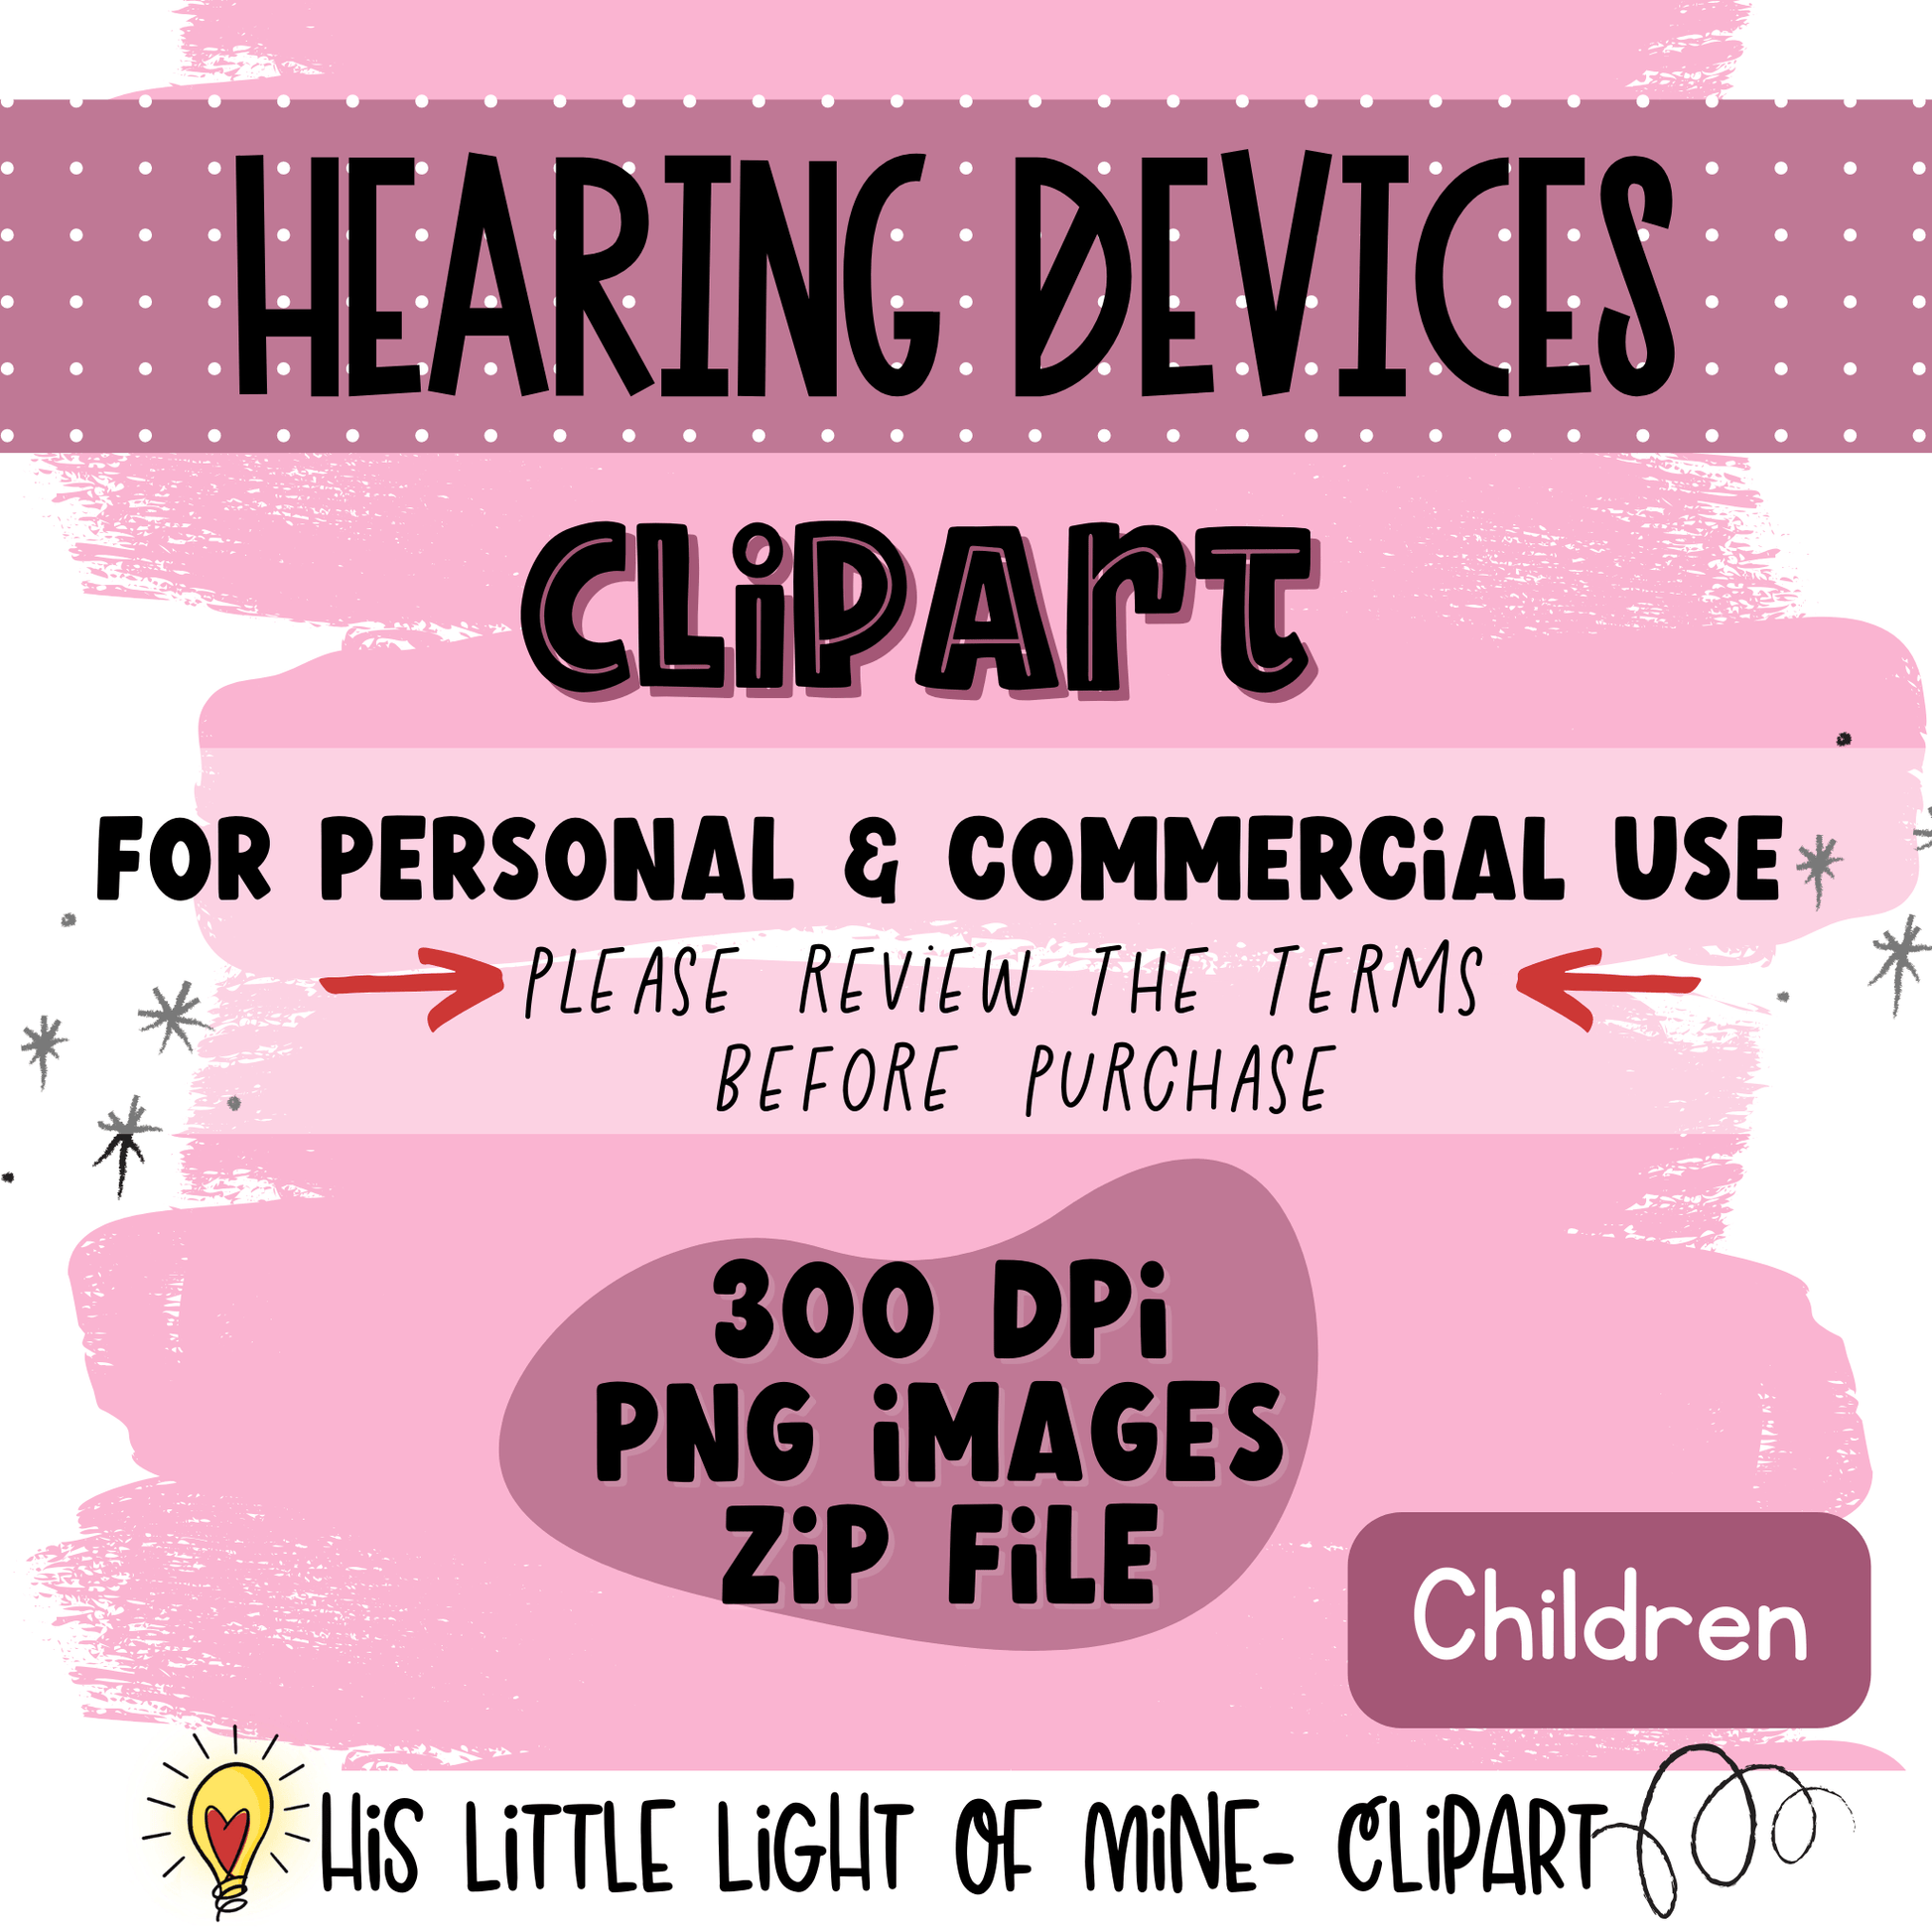 Hearing Devices Children clip art pack features both personal and commercial use (with terms) and the types and sizes of the files. 